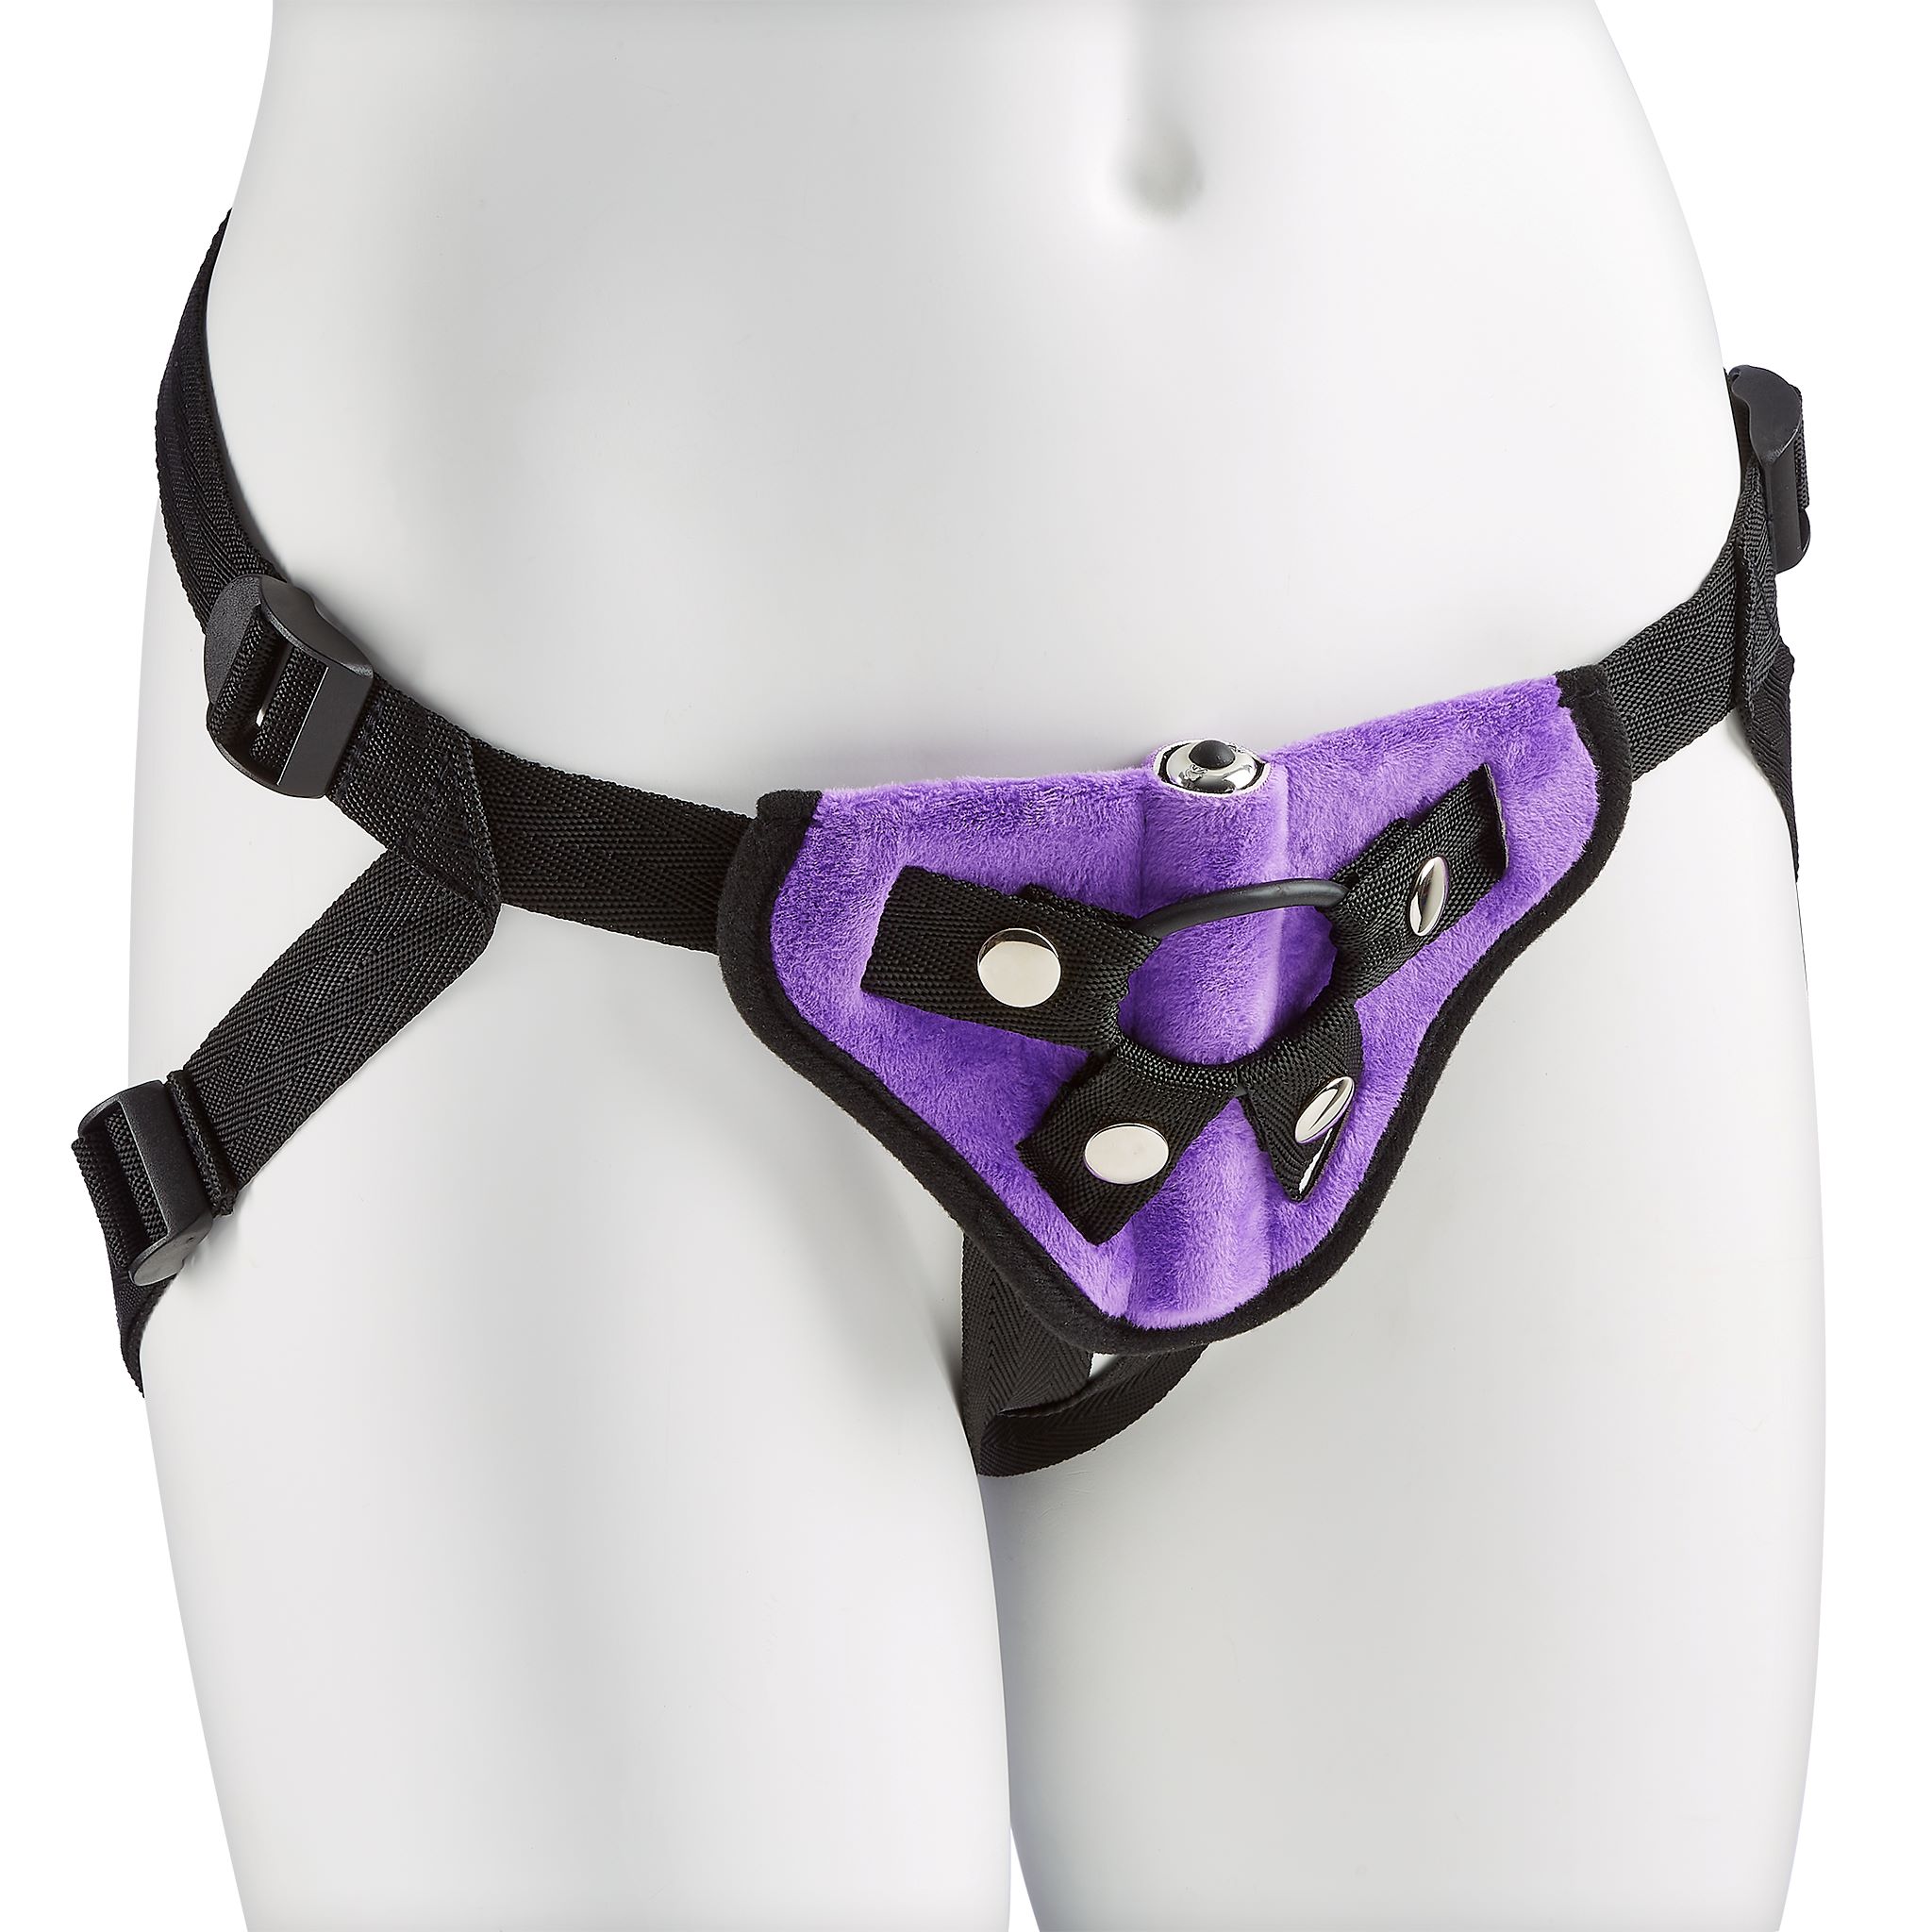 STRAP-ON HARNESS KIT PURPLE - Click Image to Close